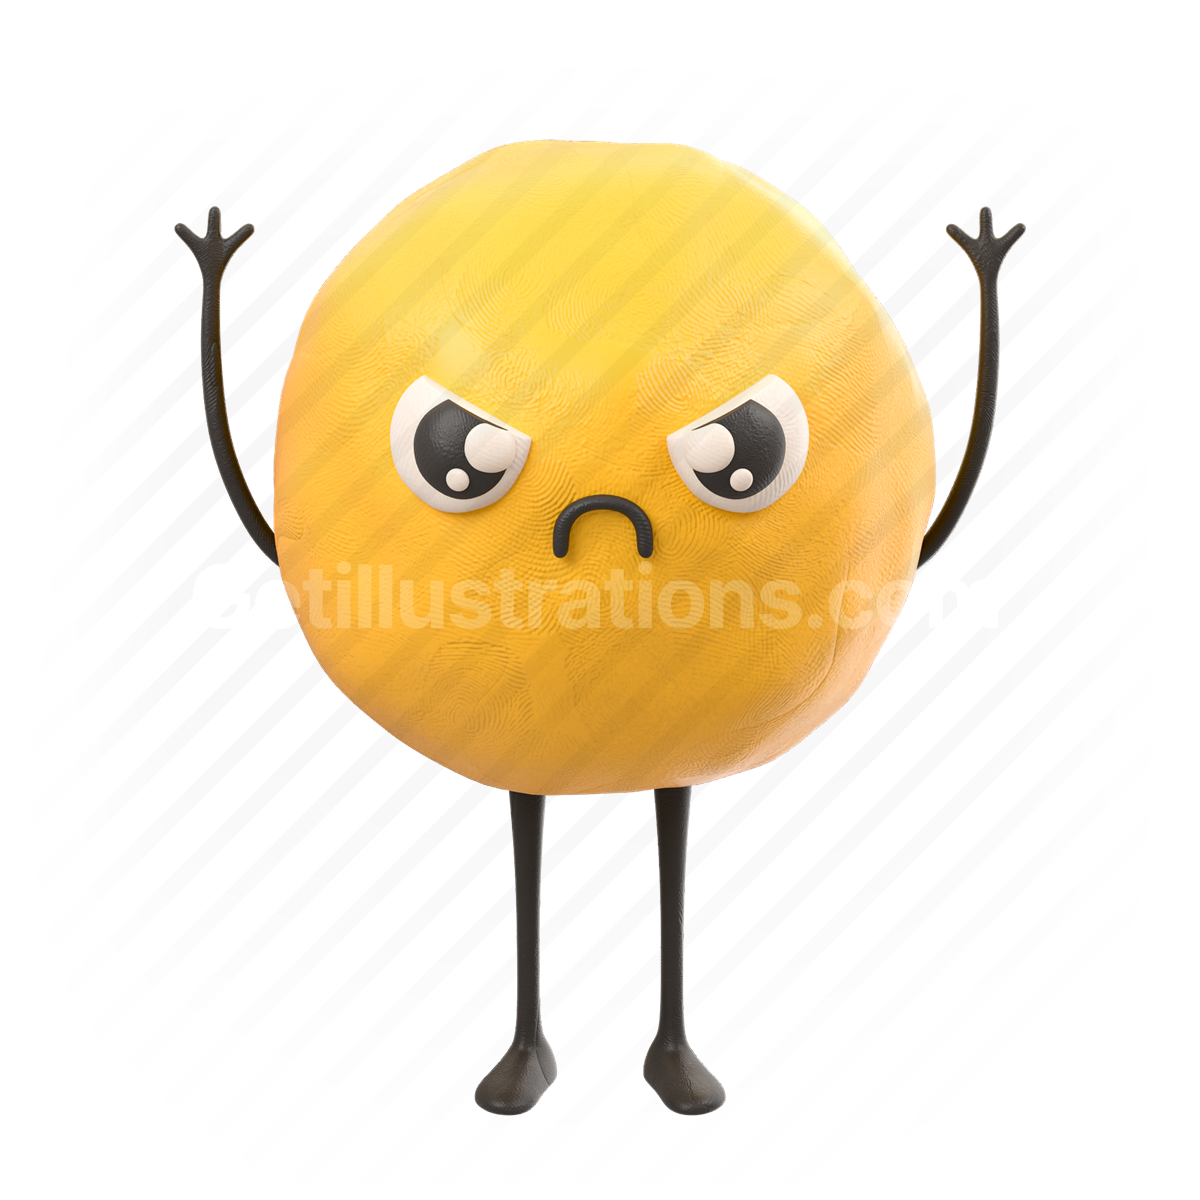 ball, character, emoticon, emoji, angry, furious, annoyed, emotion